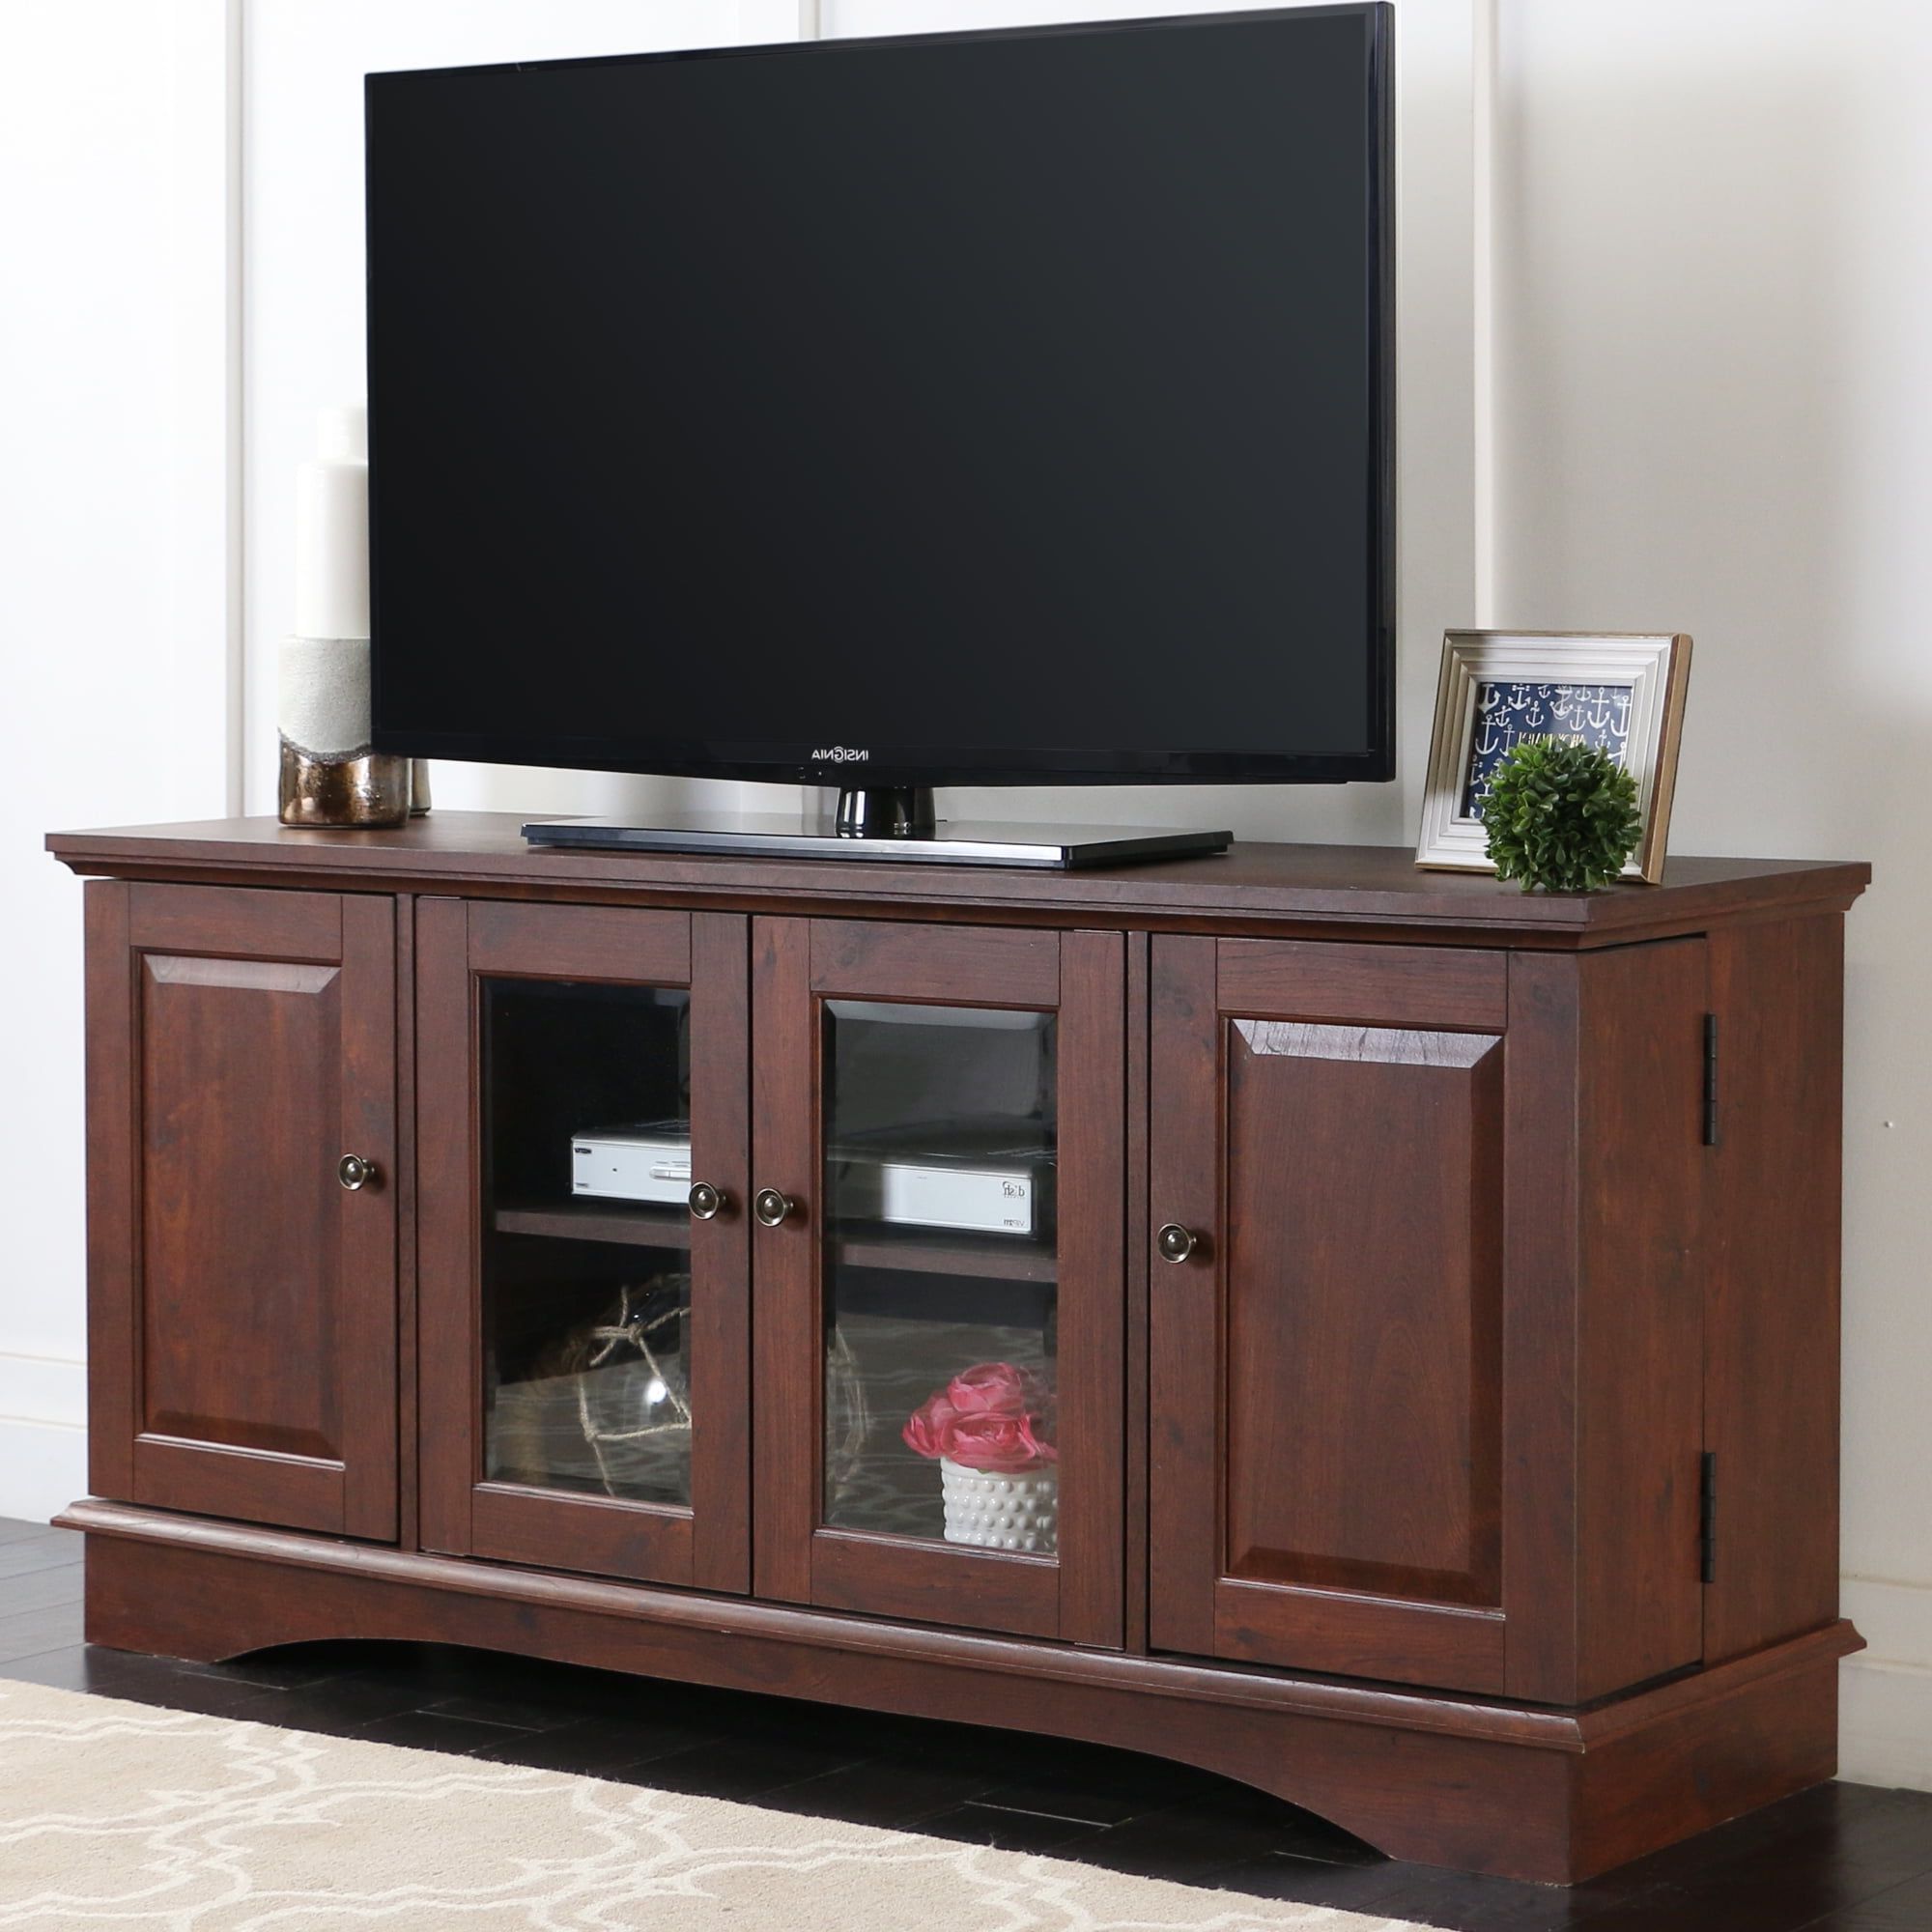 Best And Newest Walker Edison Wood Tv Stand For Tvs Up To 58′, Traditional Brown – Home In 110" Tvs Wood Tv Cabinet With Drawers (View 10 of 15)